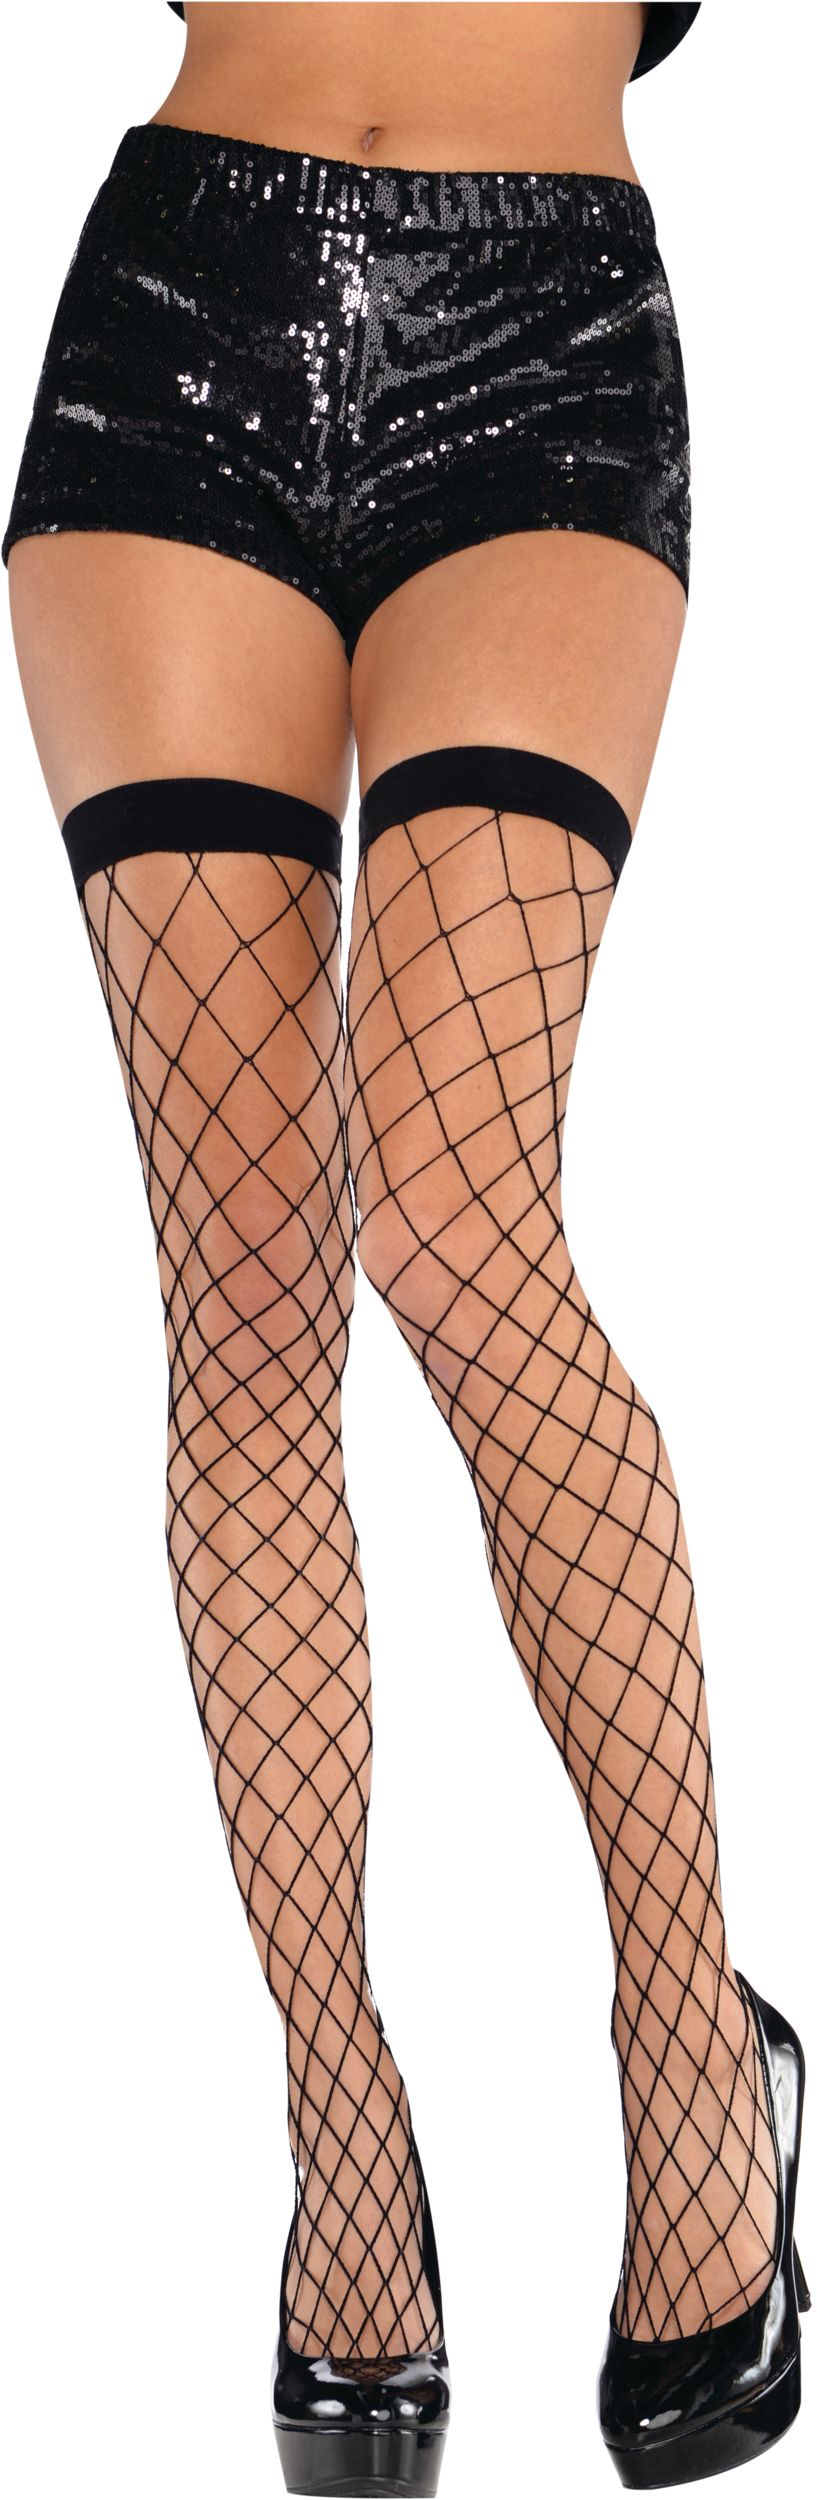 Adult Wide Diamond Fishnet Stocking Tights, Black, One Size, Wearable  Costume Accessory for Halloween